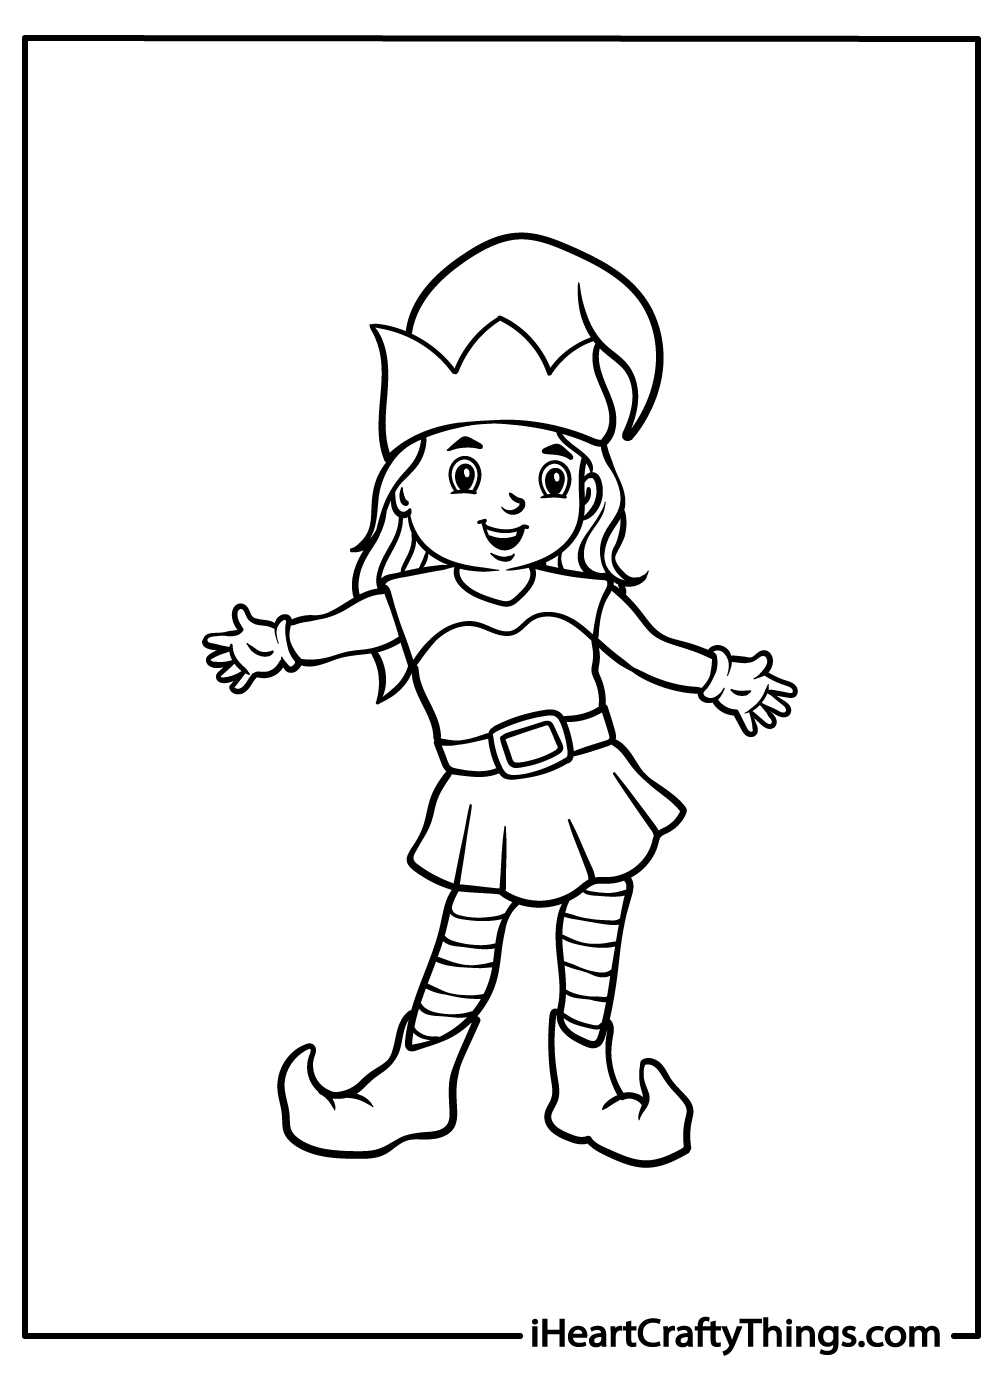 Christmas elves coloring pages free printables